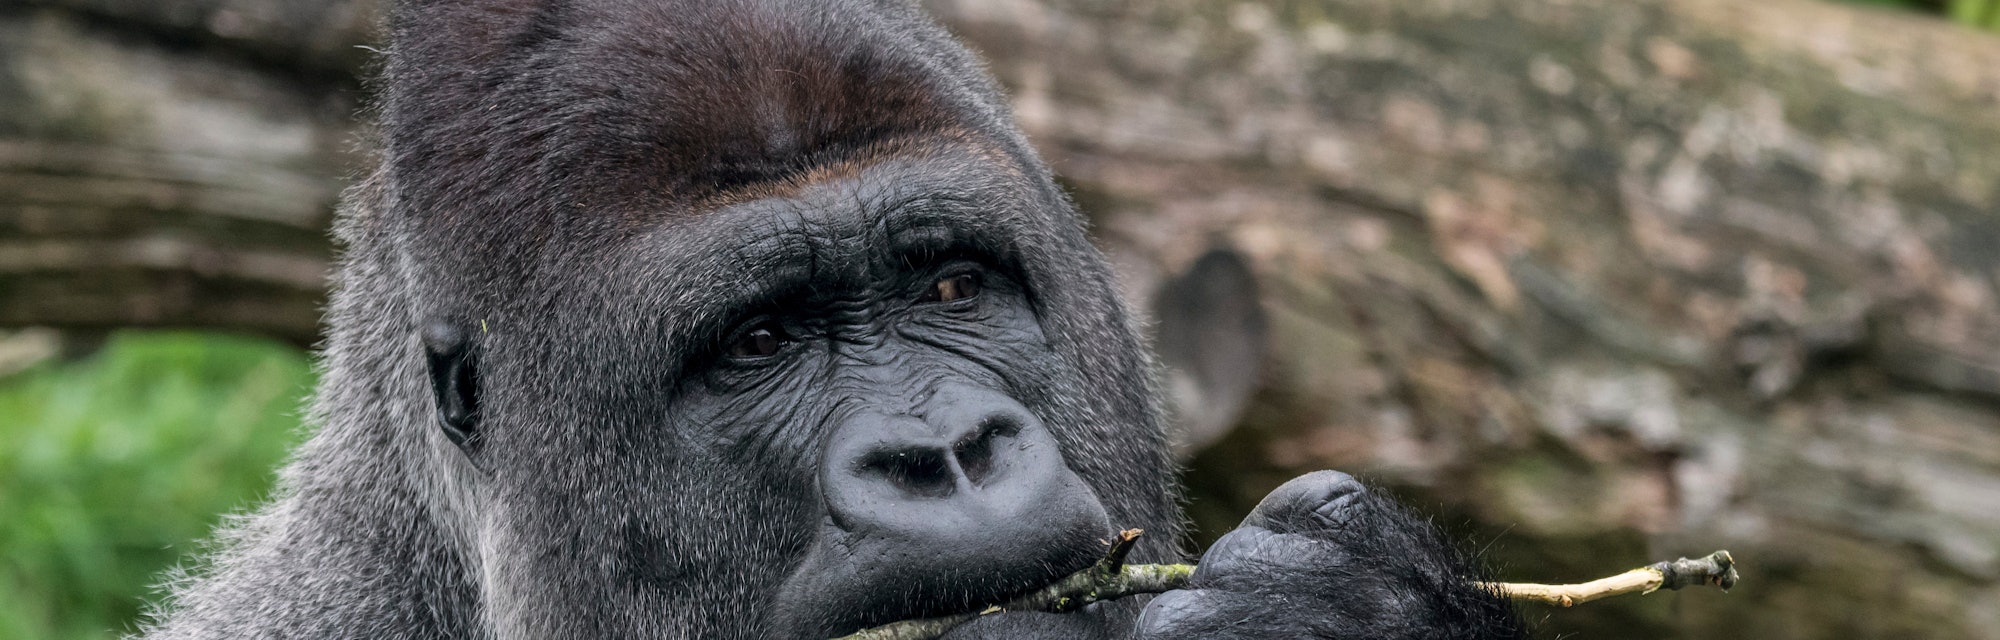 Western lowland gorilla close-up of male silverback chewing on twig